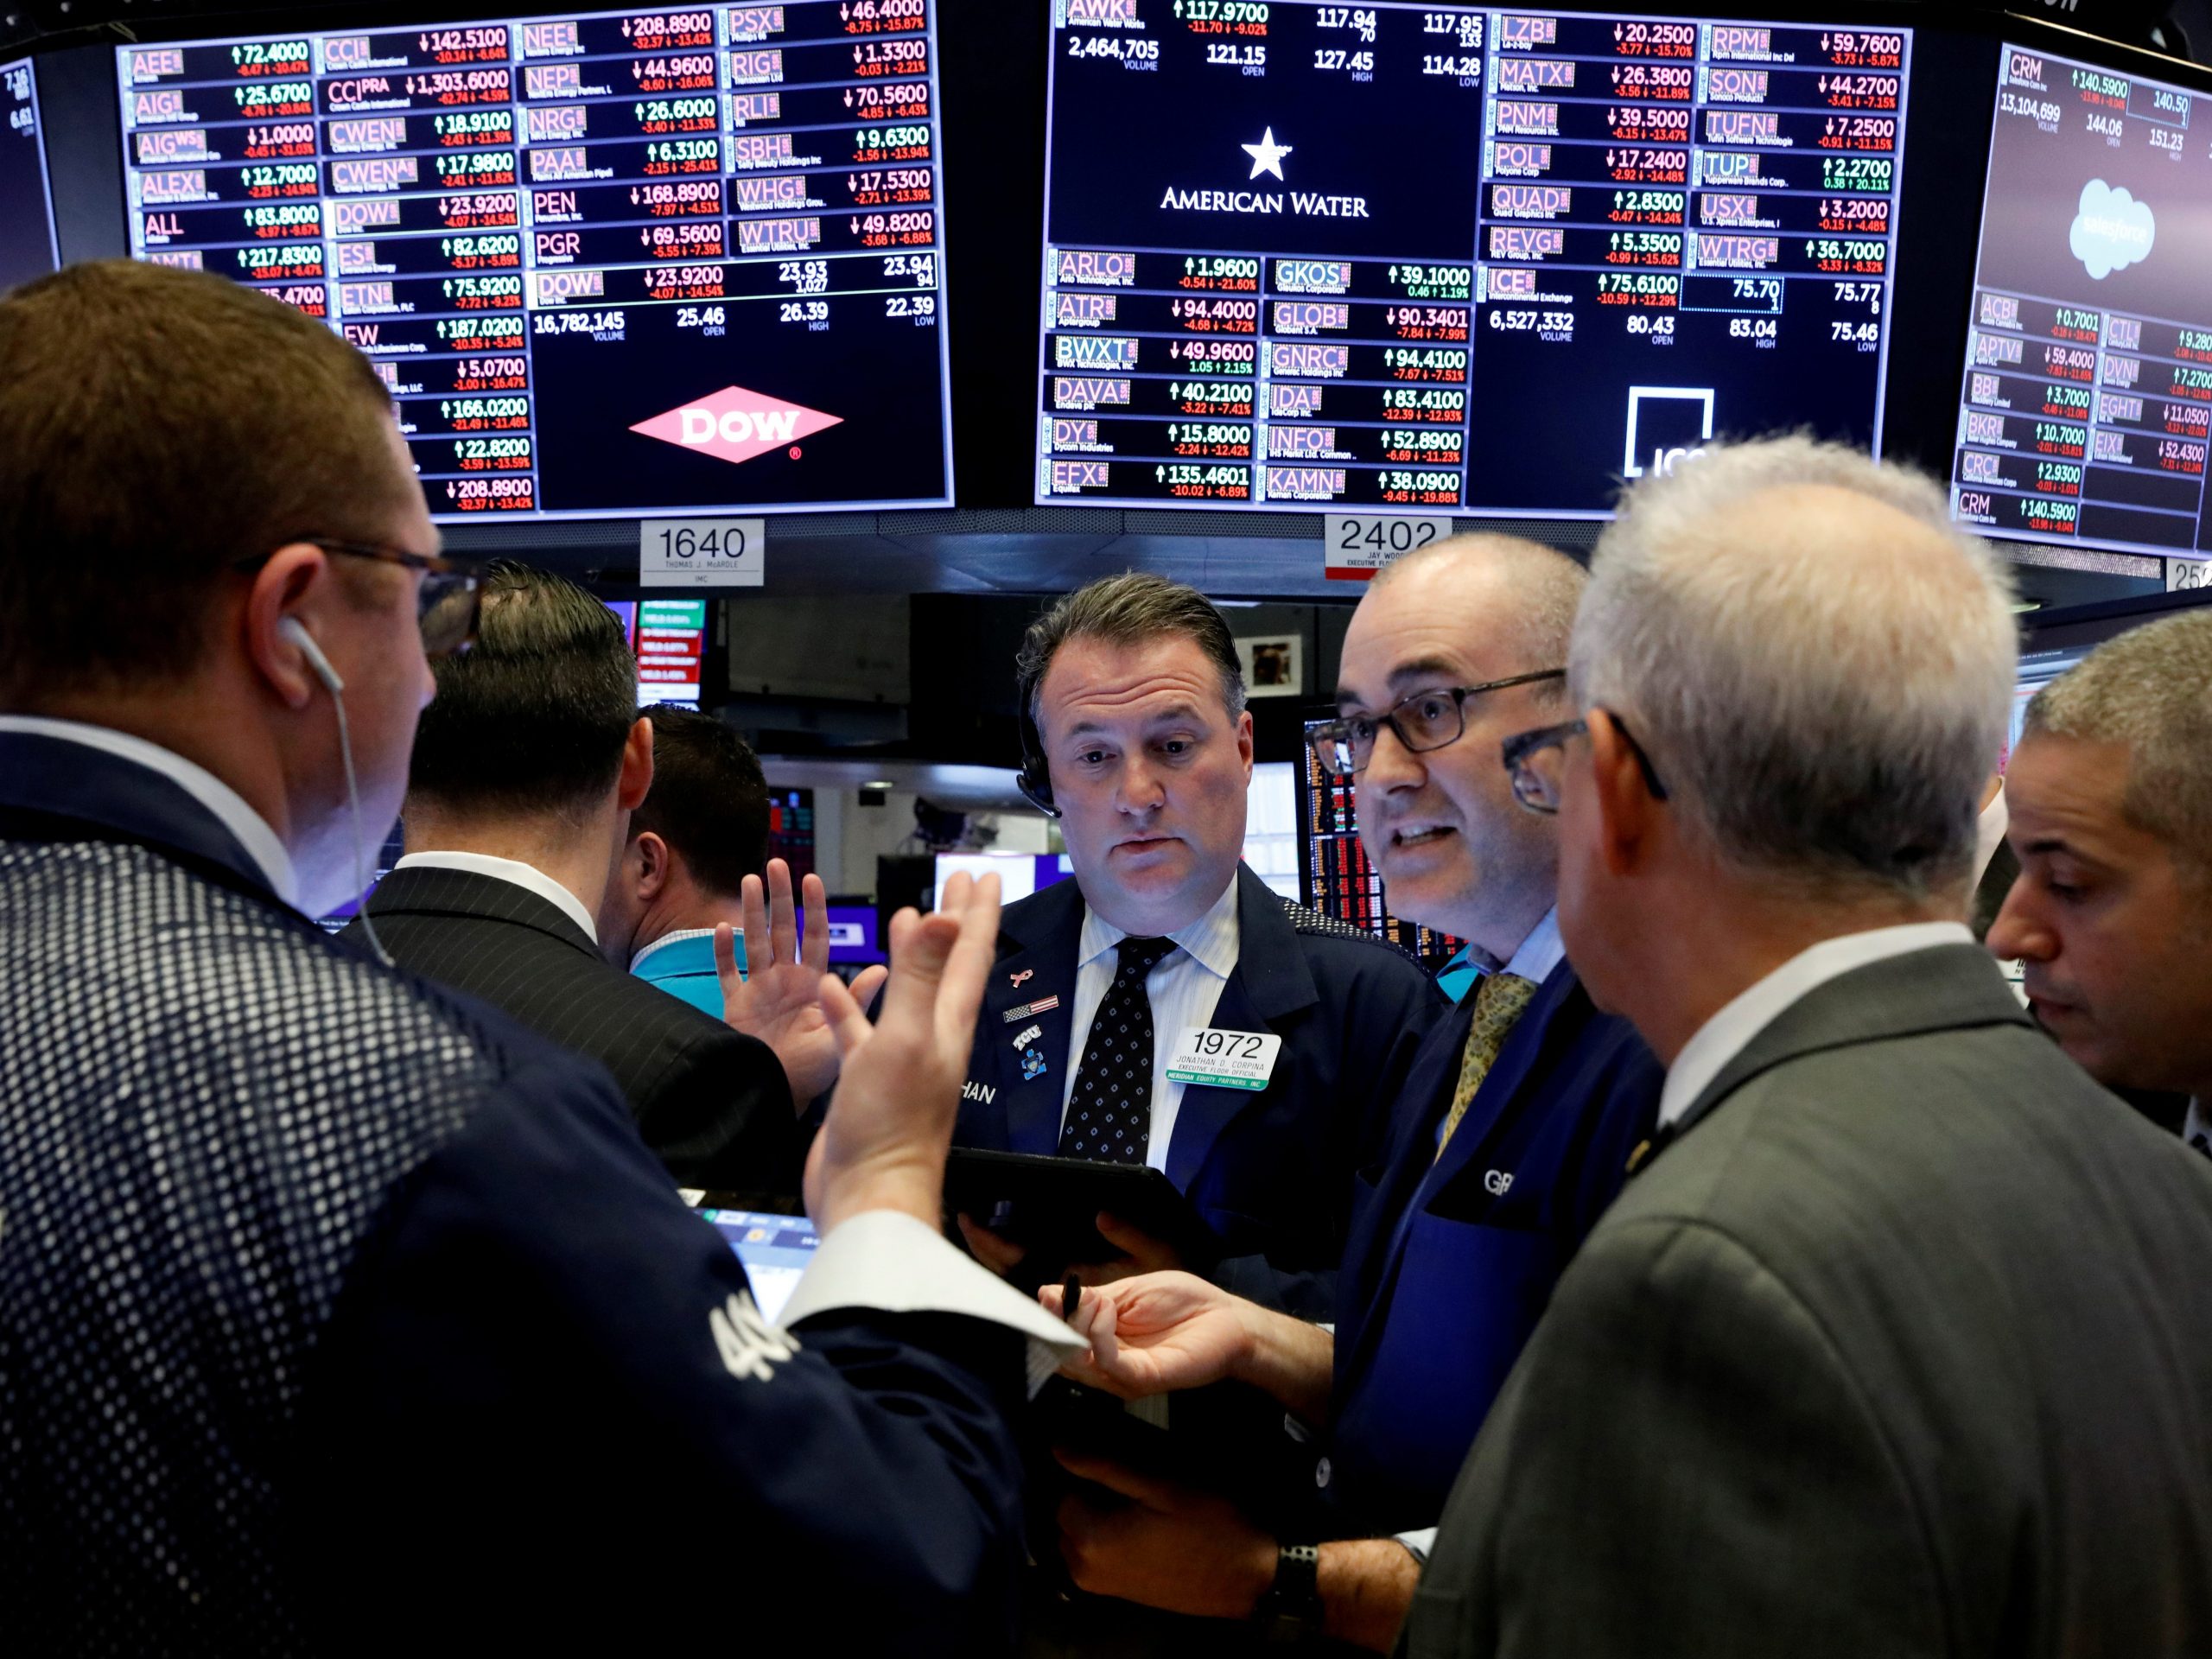 FILE PHOTO: Traders work on the floor of the New York Stock Exchange (NYSE) near the close of trading in New York, U.S., March 12, 2020. REUTERS/Brendan McDermid/File Photo